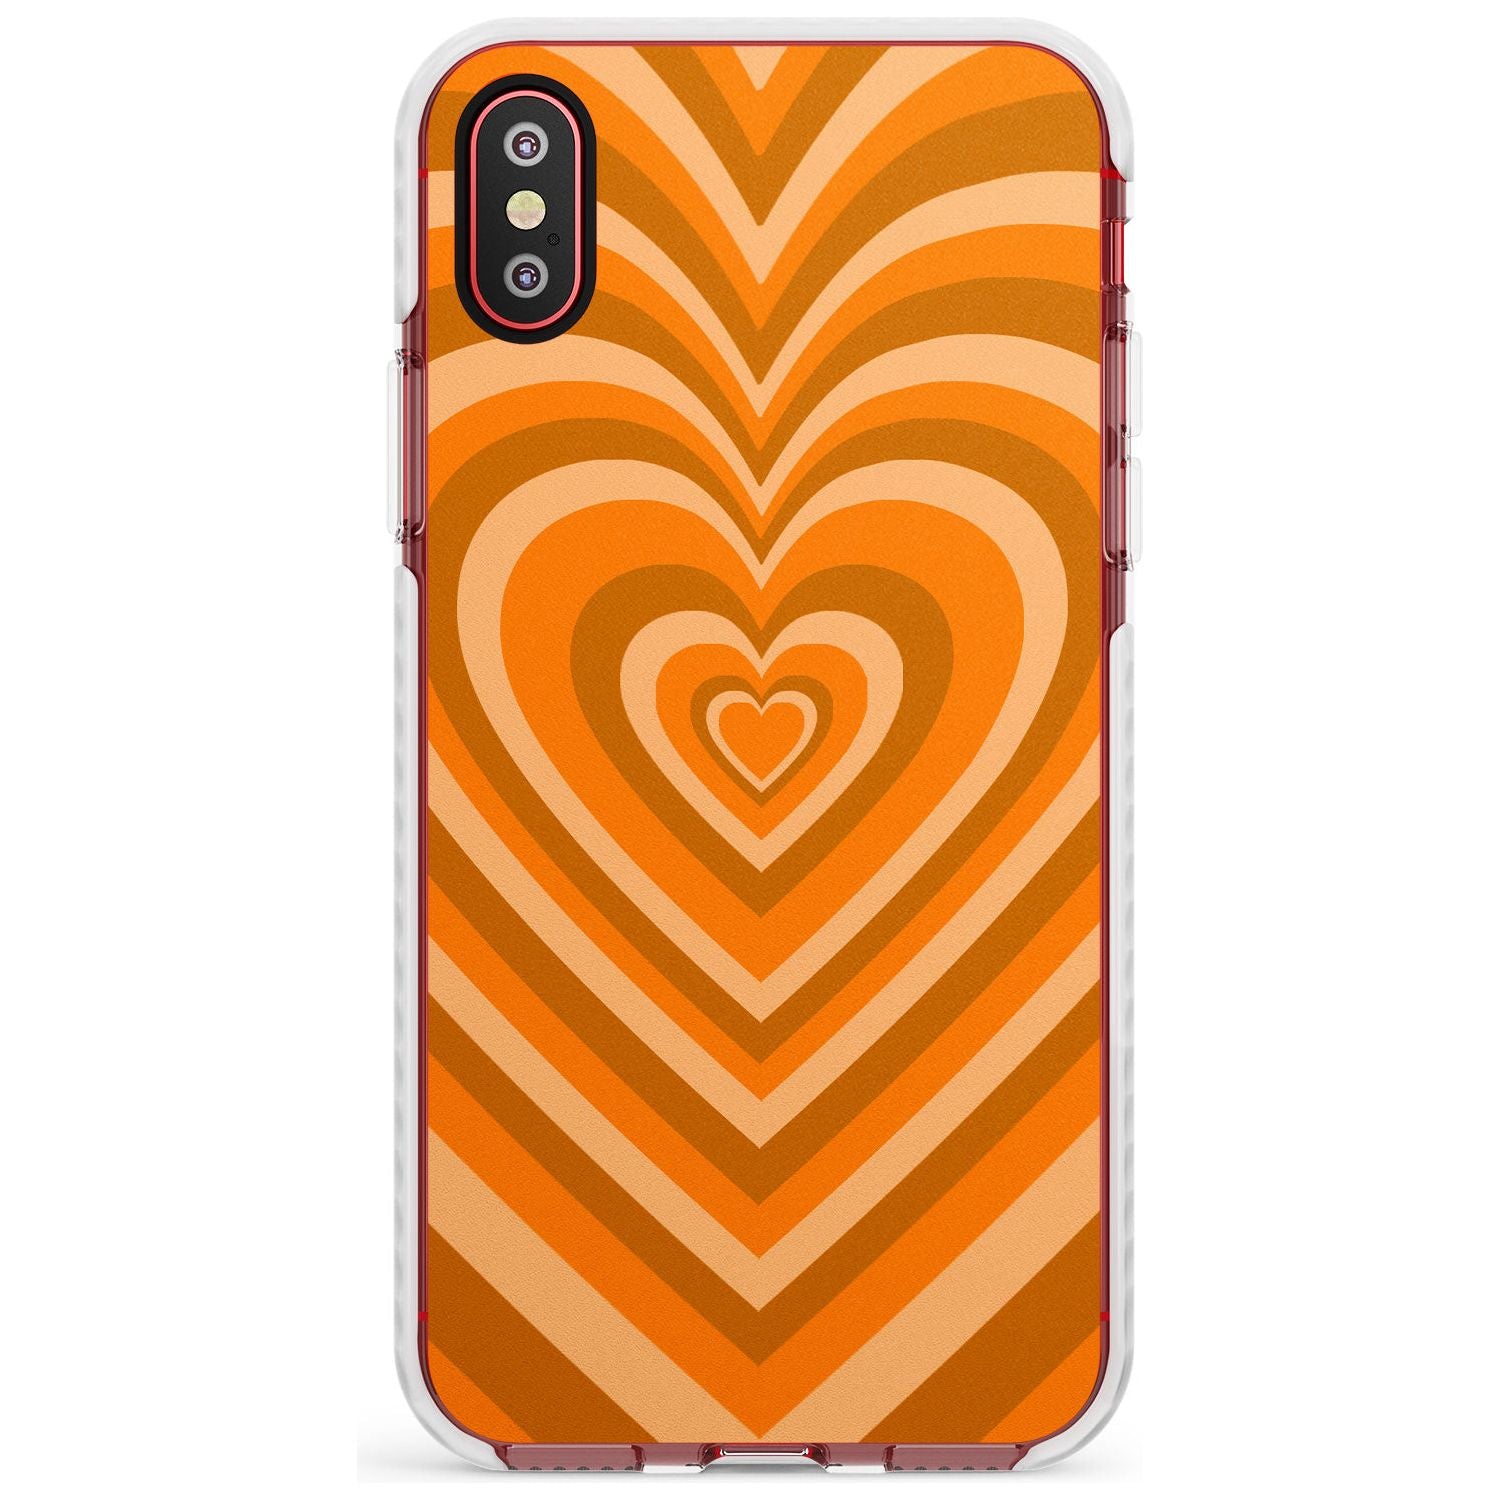 Orange Heart Illusion Impact Phone Case for iPhone X XS Max XR